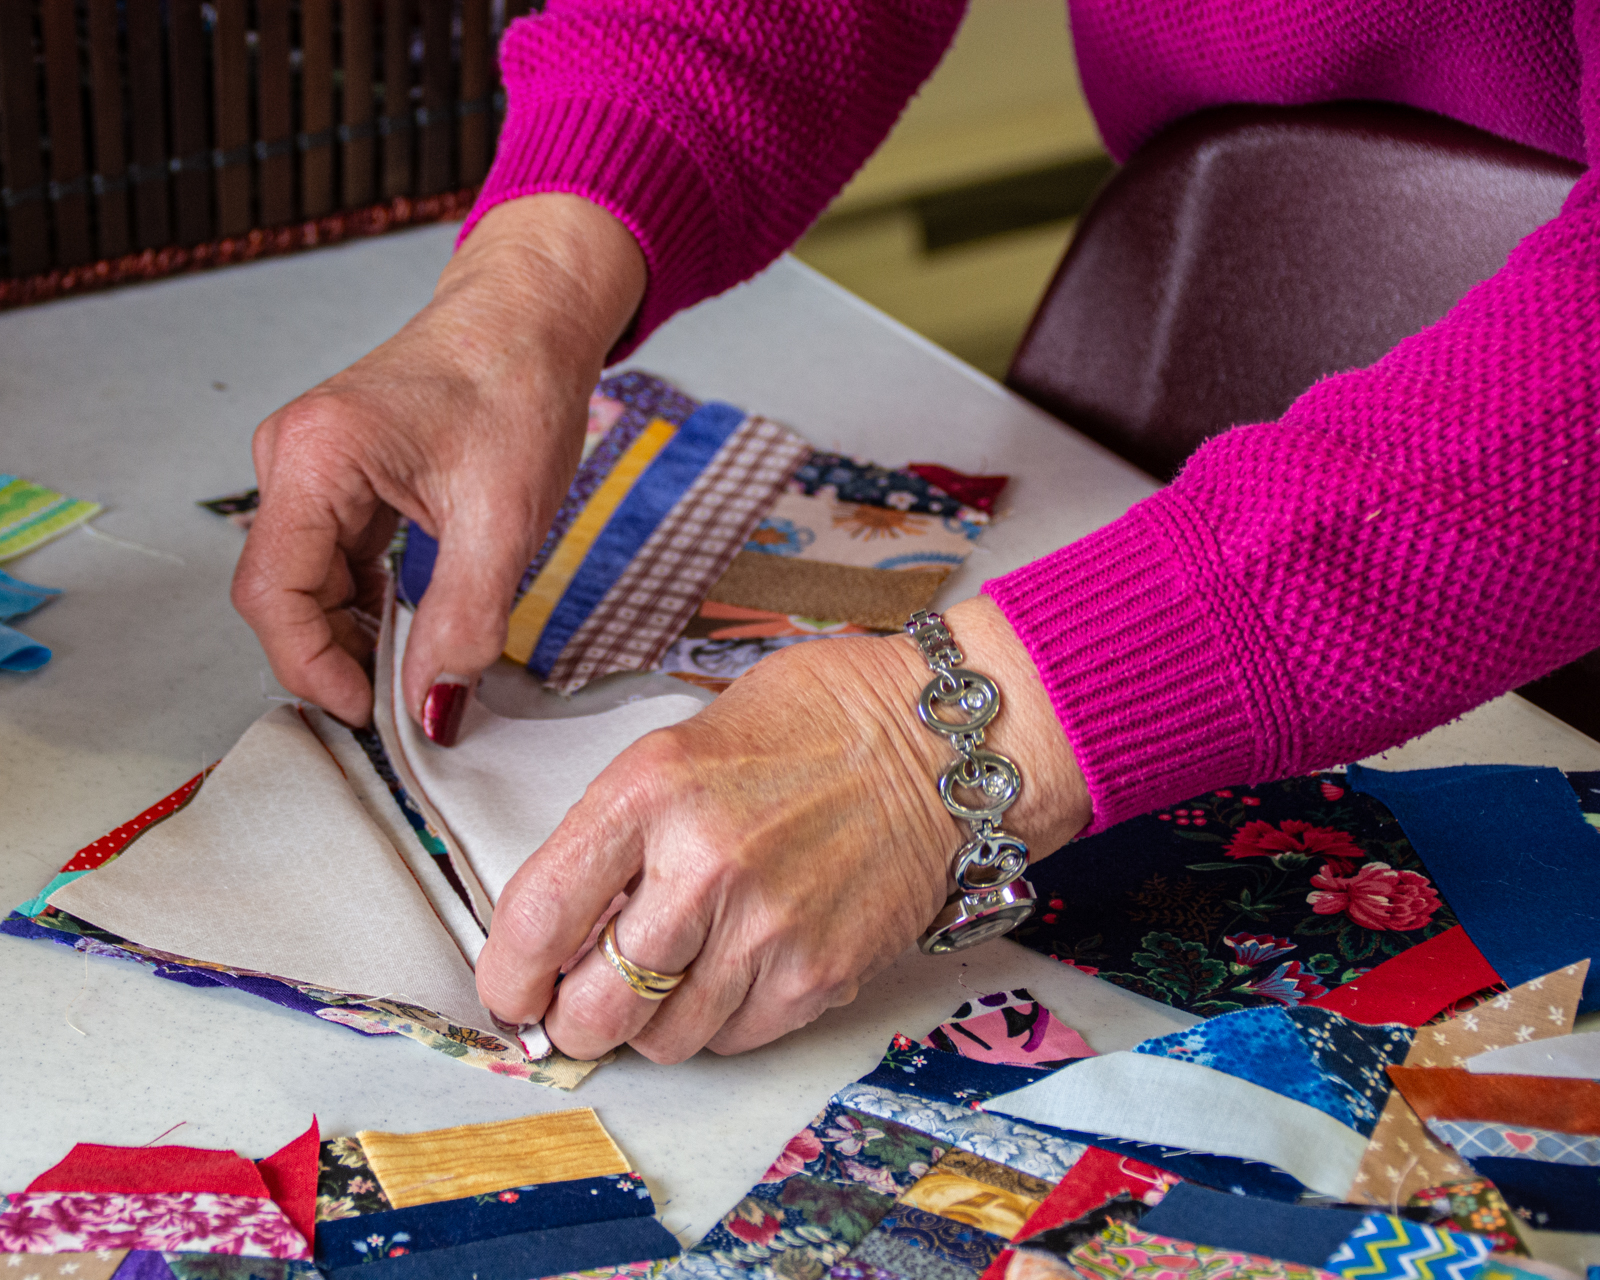 Here Colleen is demonstrating how to fold material to make squares for a crumb quilt.